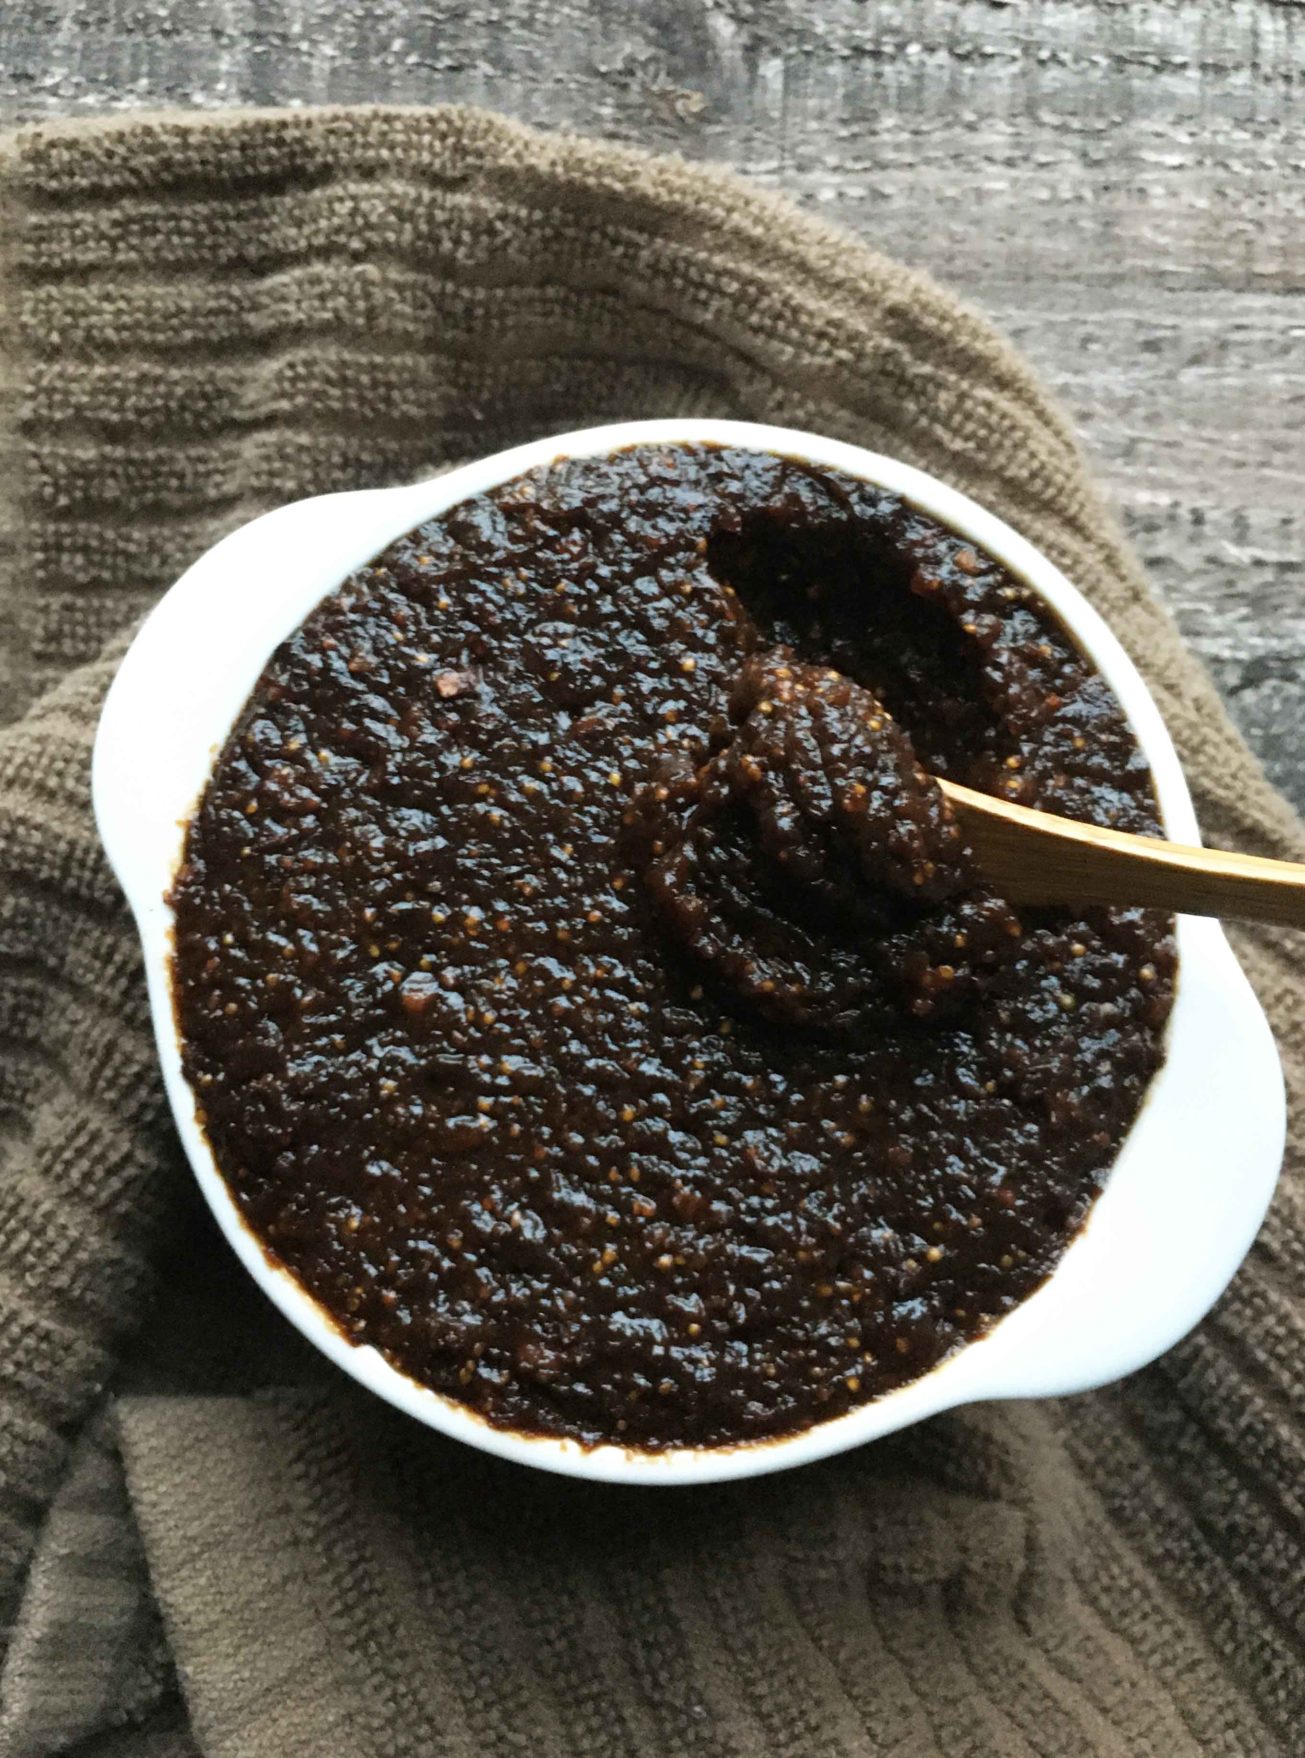 Applesauce and mashed bananas are familiar fat replacers in baking. Discover how to make fig puree for a new way to lower fat and increase nutrition.